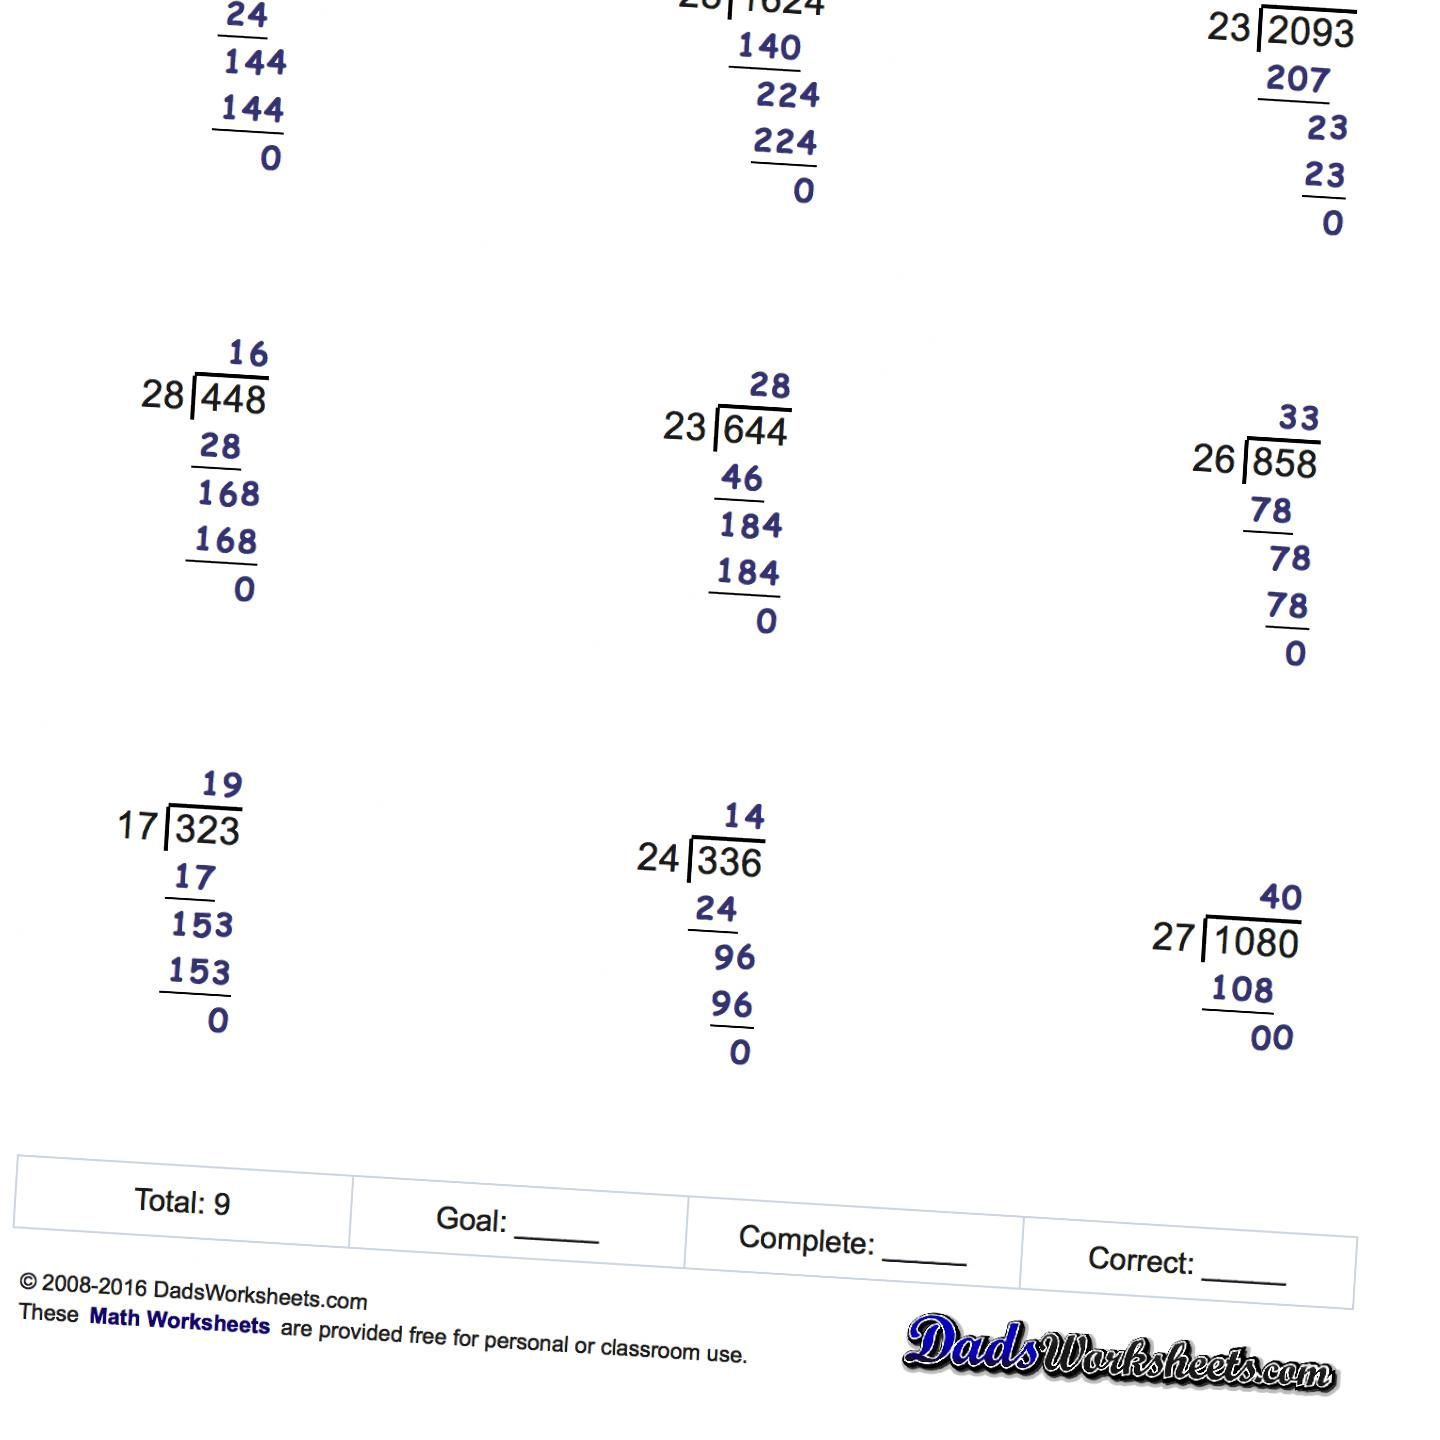 Long Division Worksheets Printable With Answer Keys That Show All The 